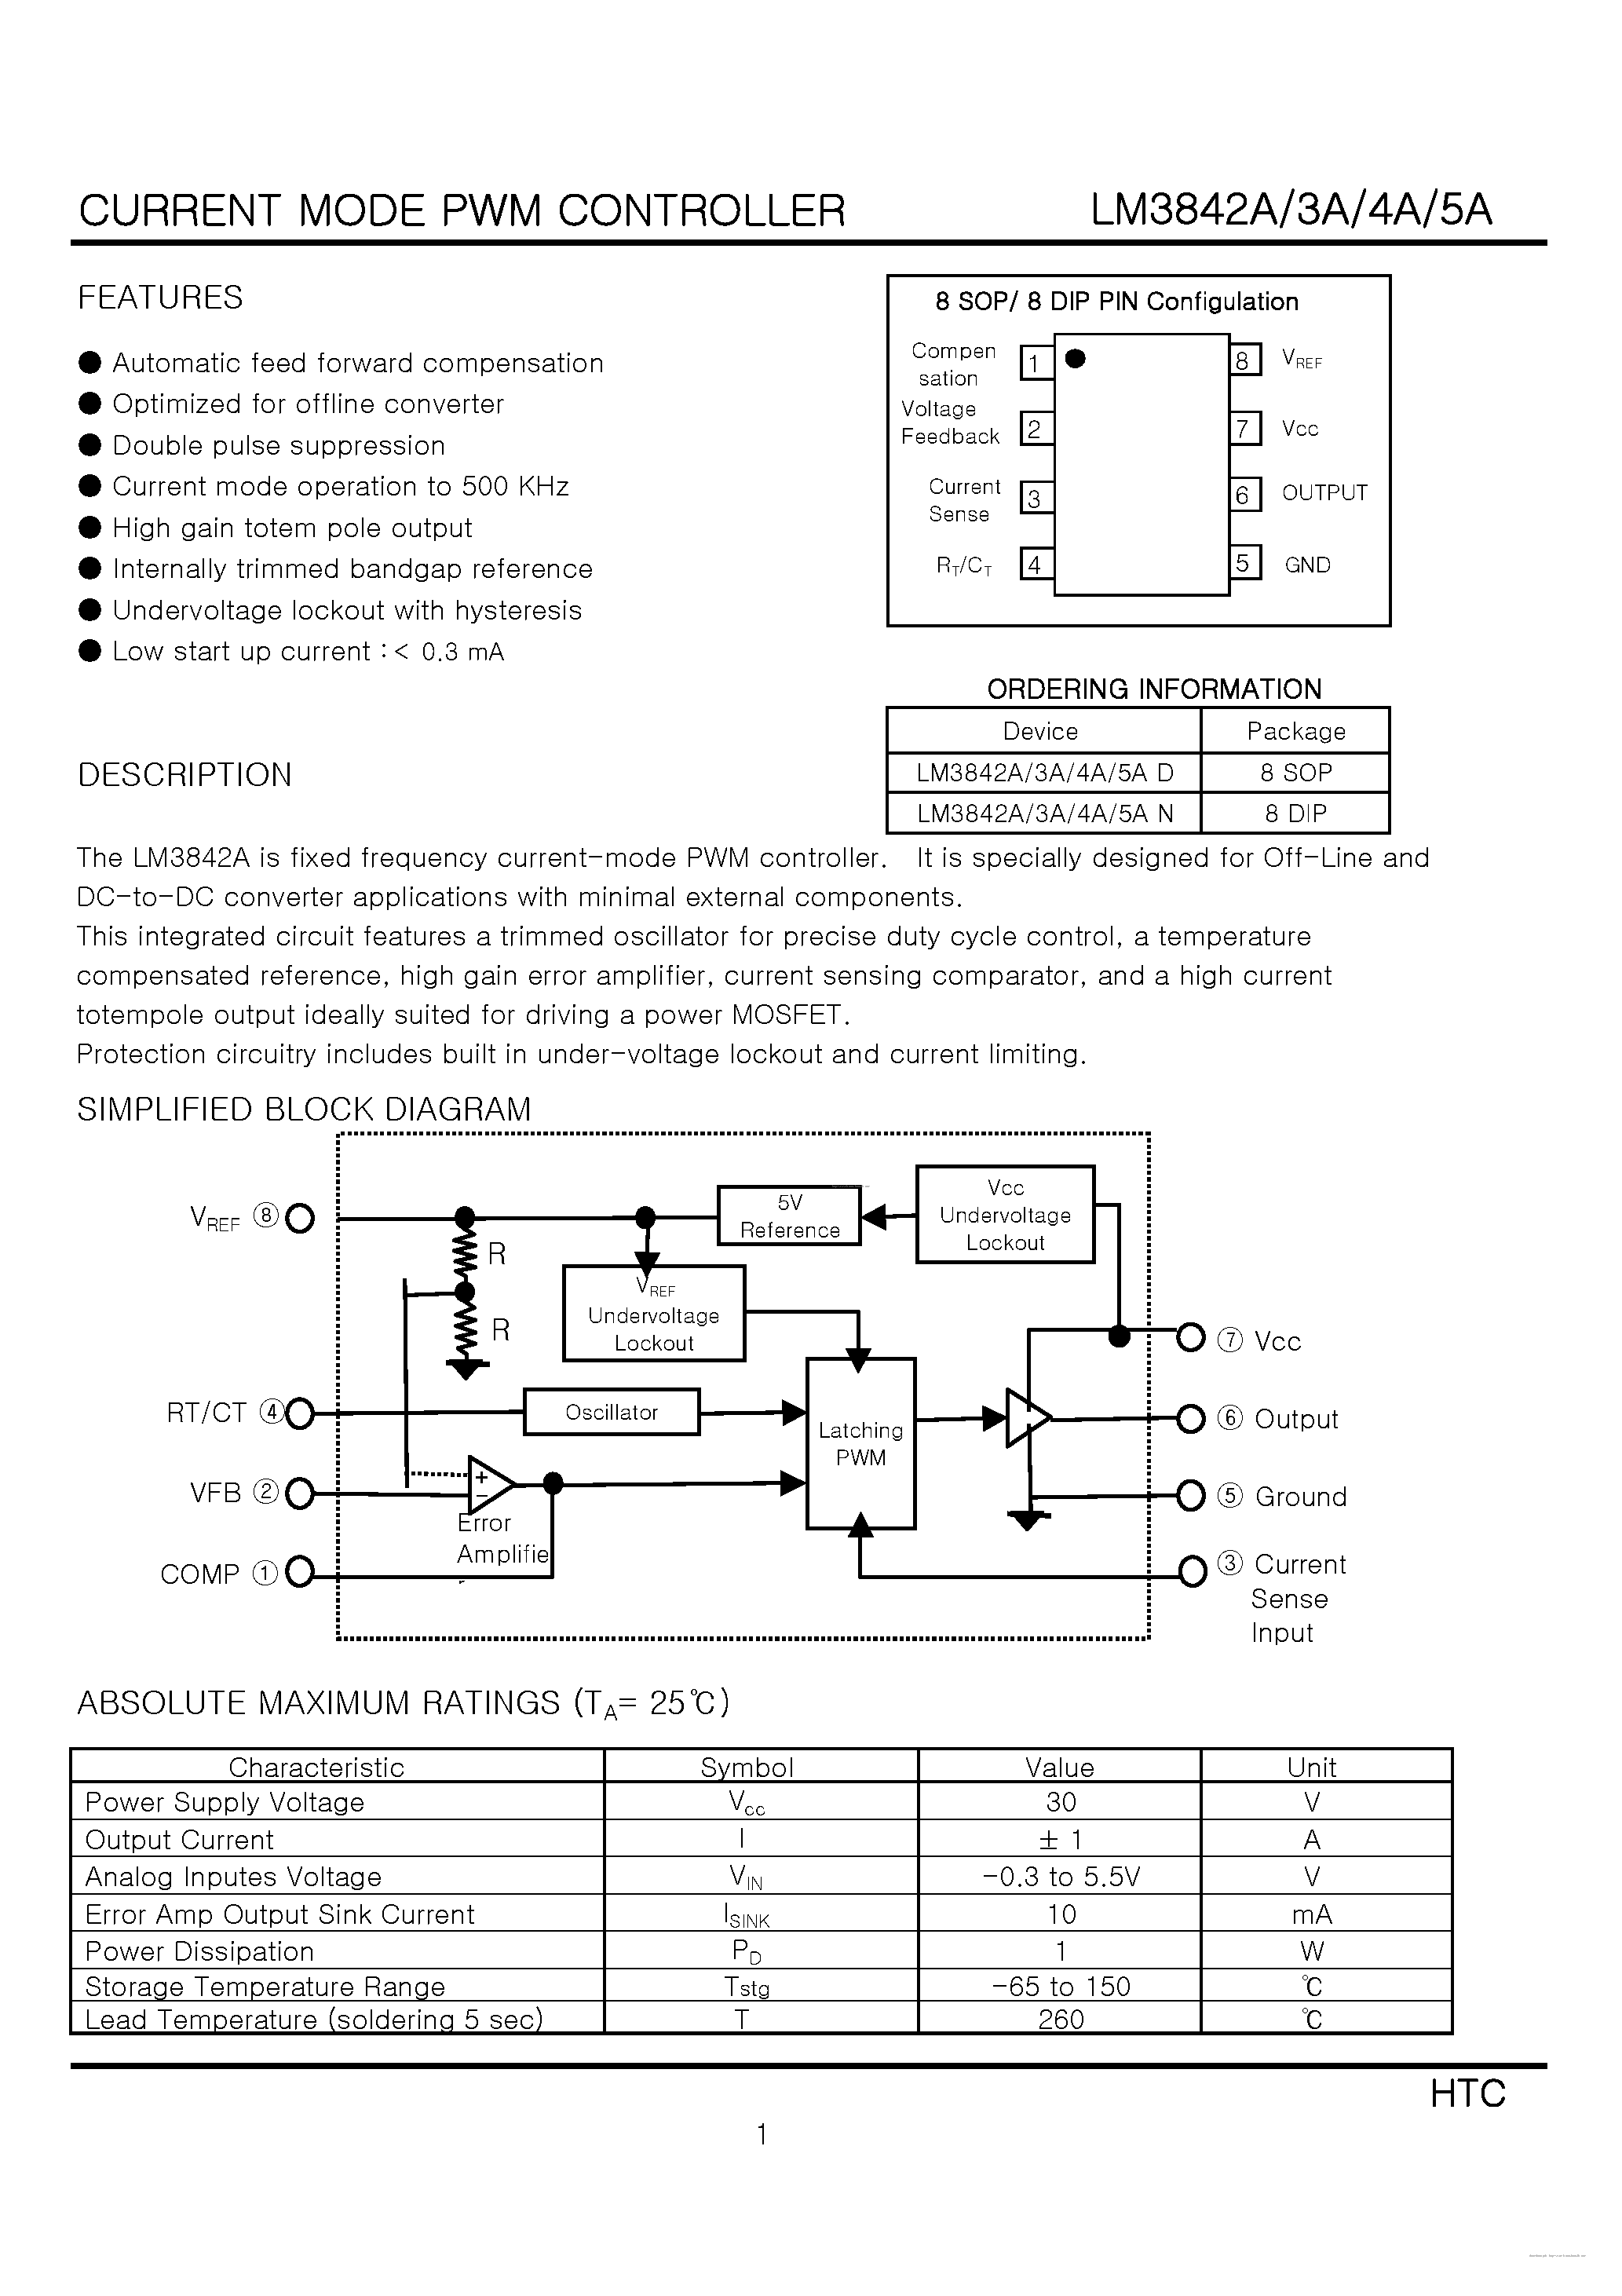 Datasheet LM3842A - page 1